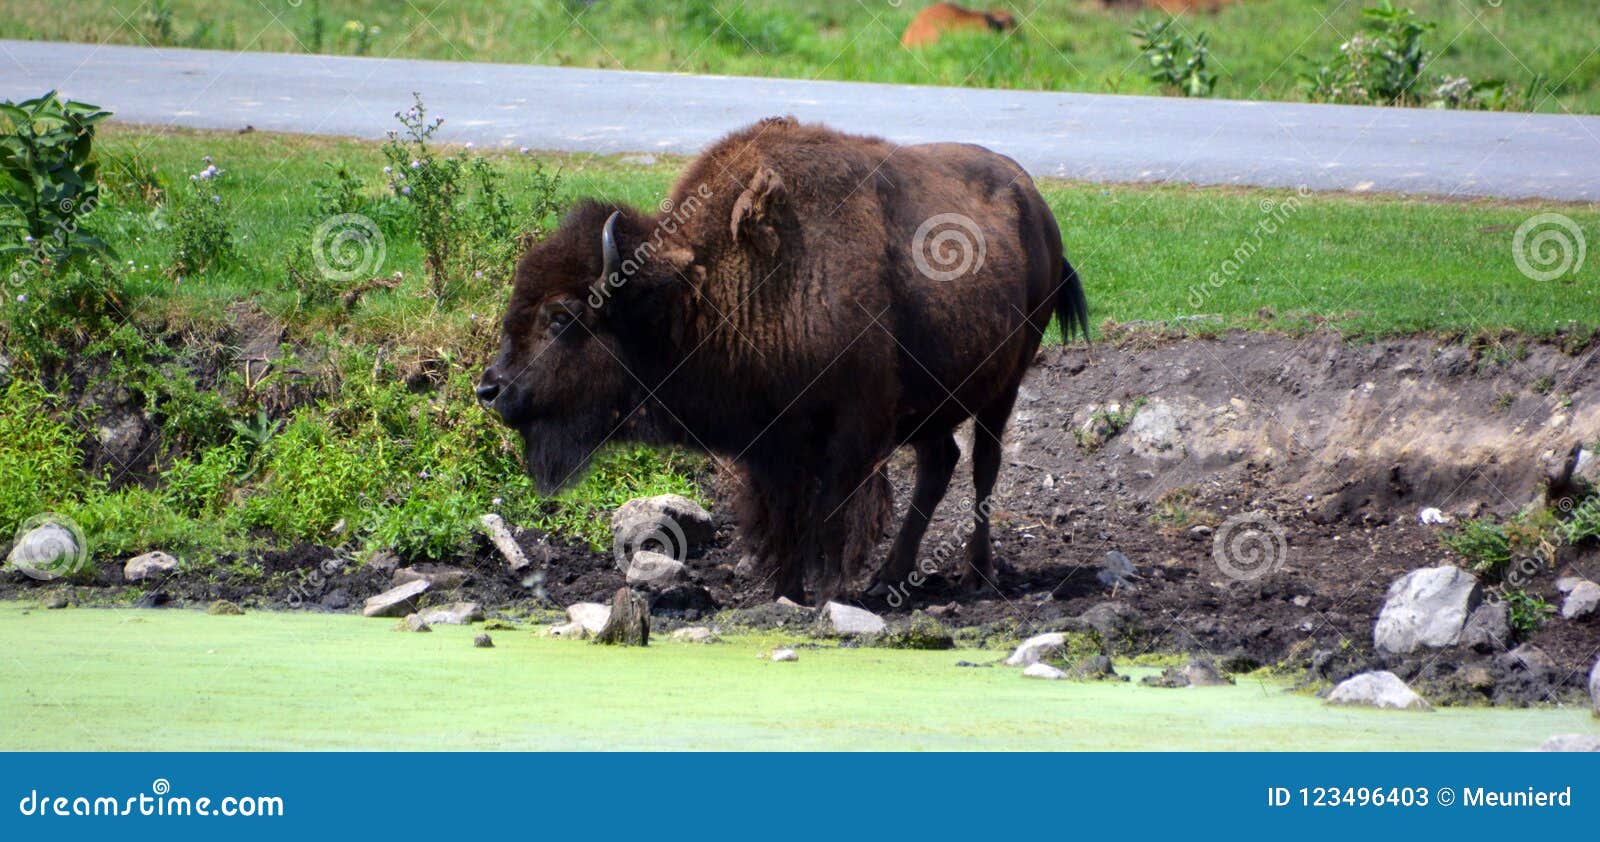 bison are large, even-toed ungulates